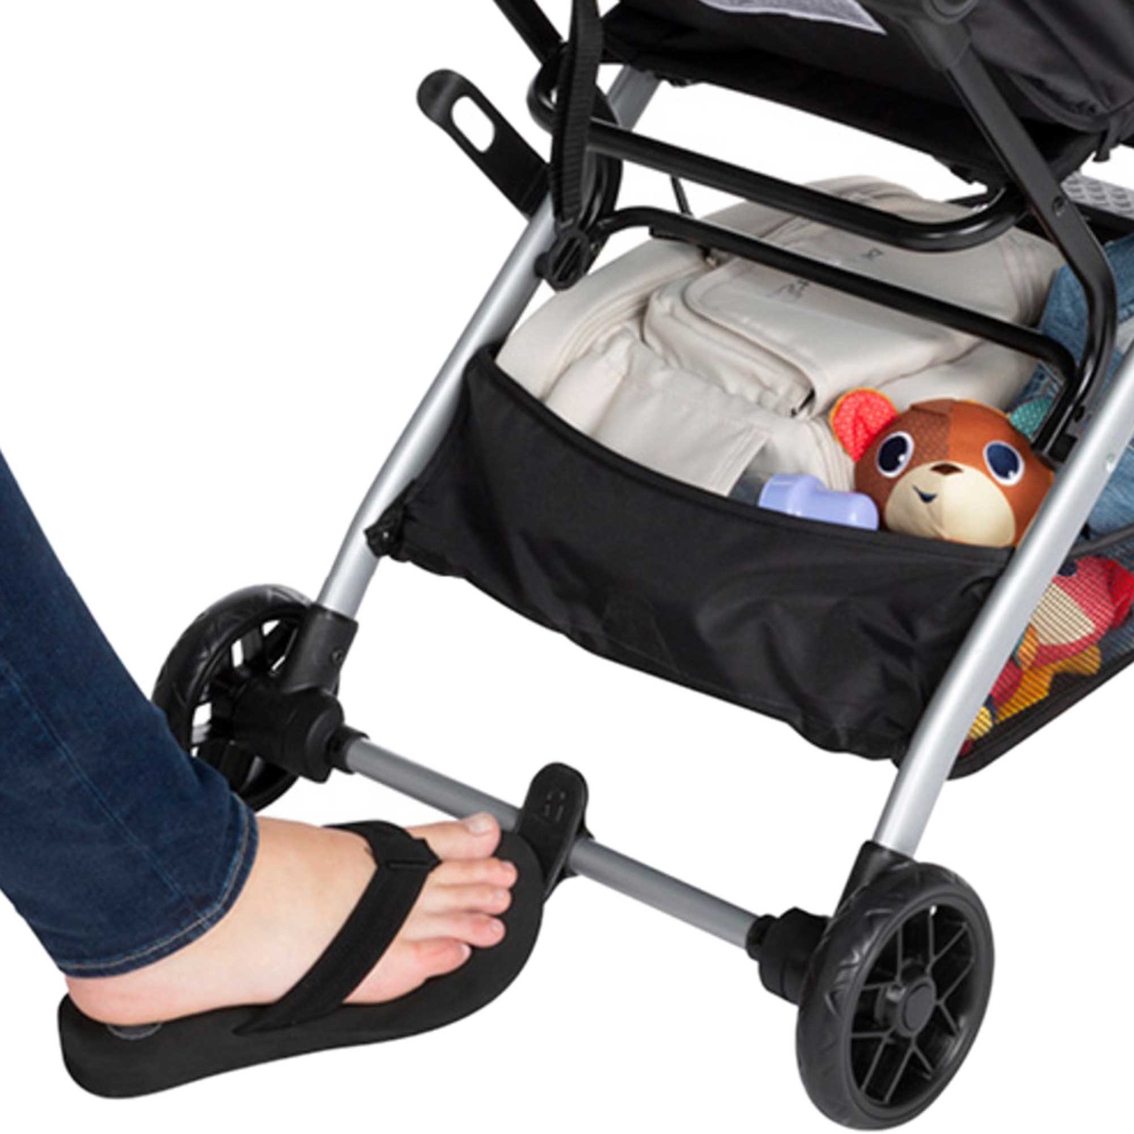 Safety 1st Teeny Ultra Compact Stroller - Image 8 of 8